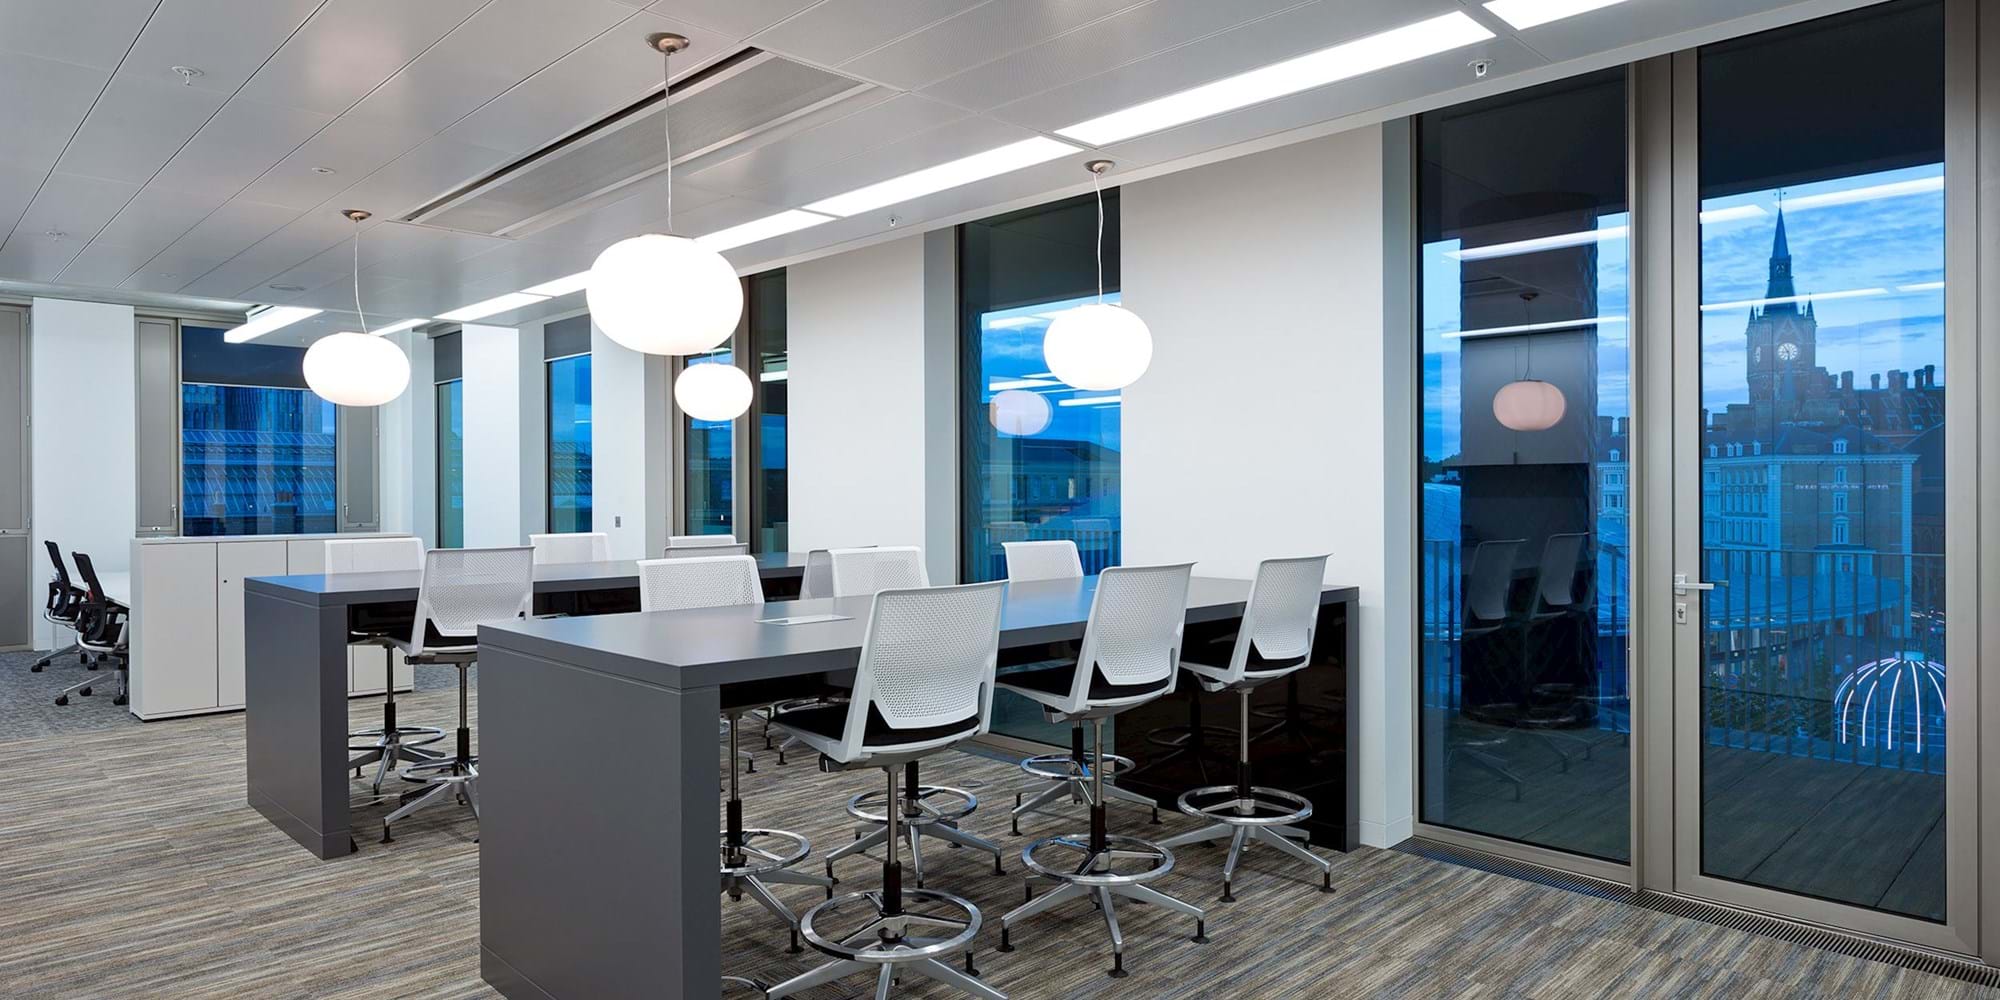 Modus Workspace office design, fit out and refurbishment - IT Company - Breakout - CSG London 05 highres sRGB.jpg